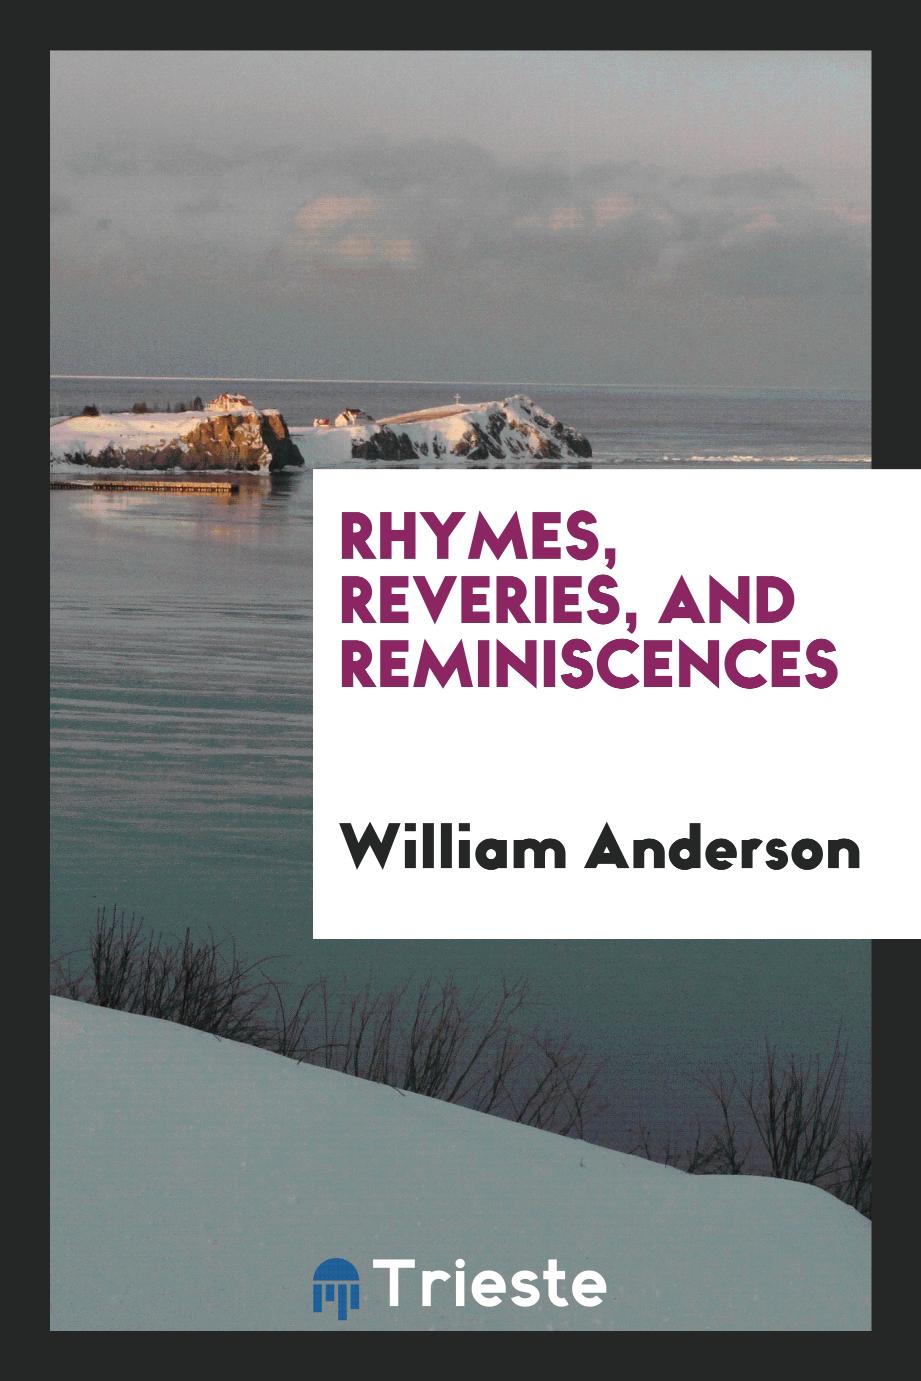 Rhymes, reveries, and reminiscences